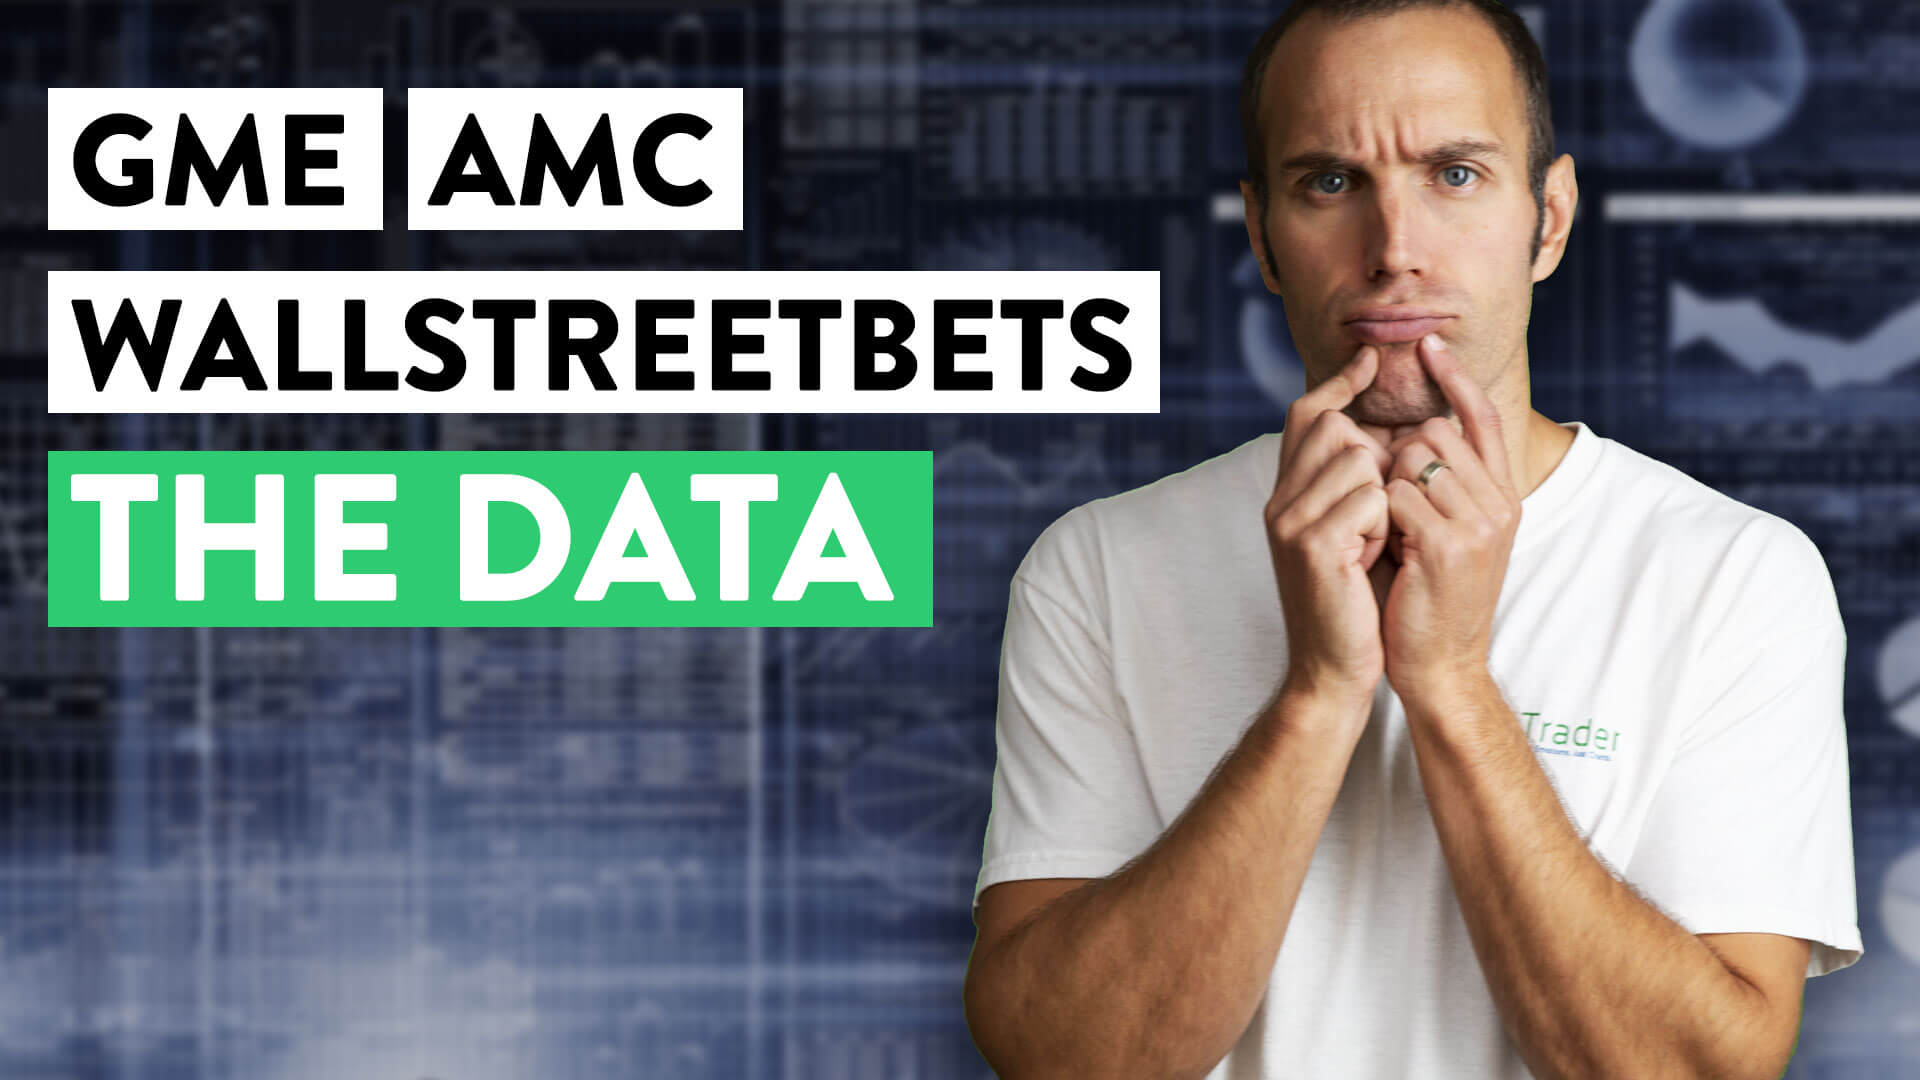 GME, AMC, WallStreetBets and The Data... Let's Take a Look...